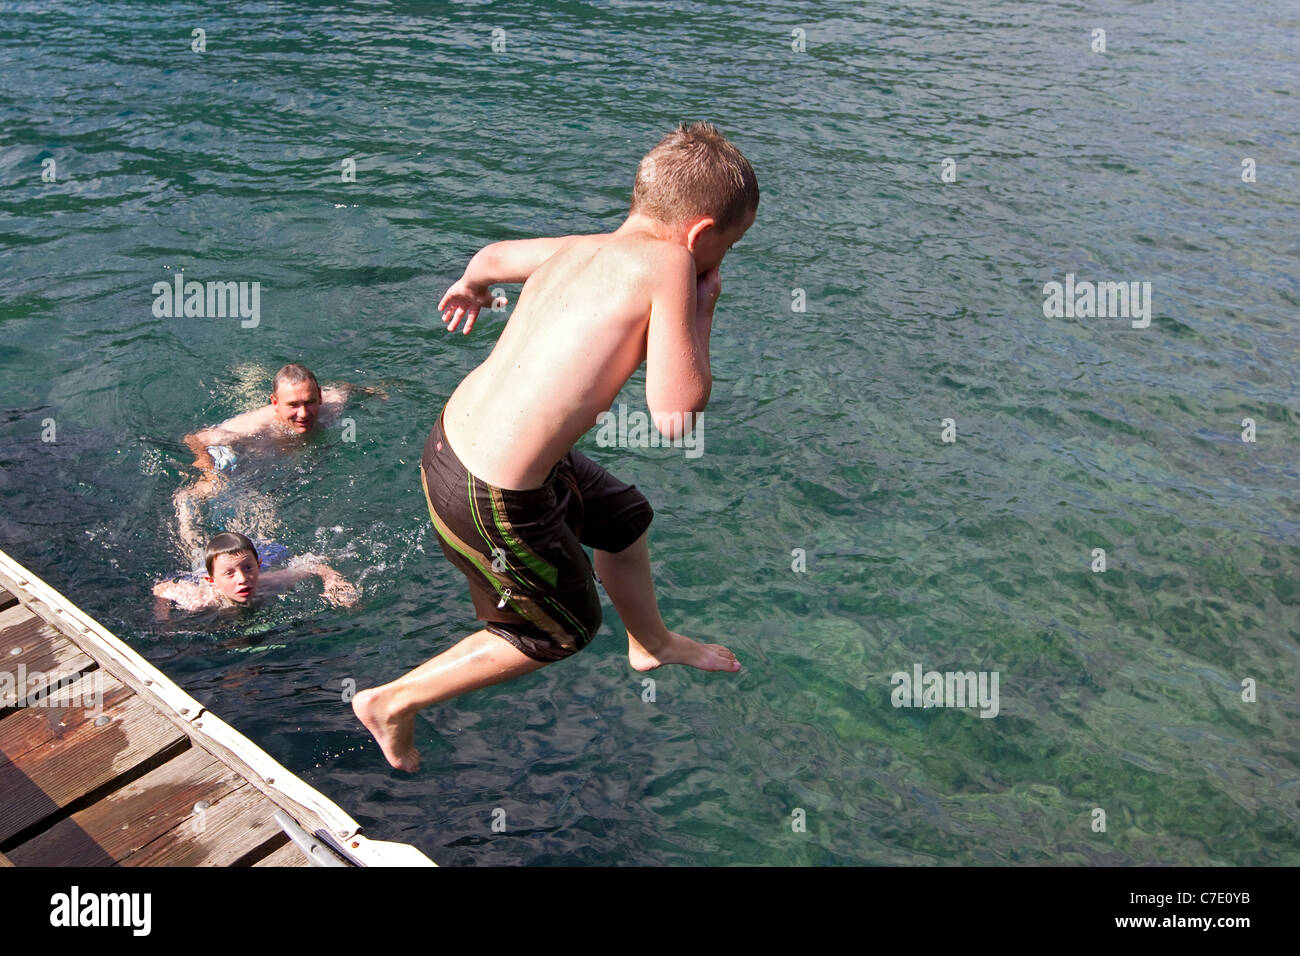 Boy leaps into lake from dock, summer fun family Stock Photo